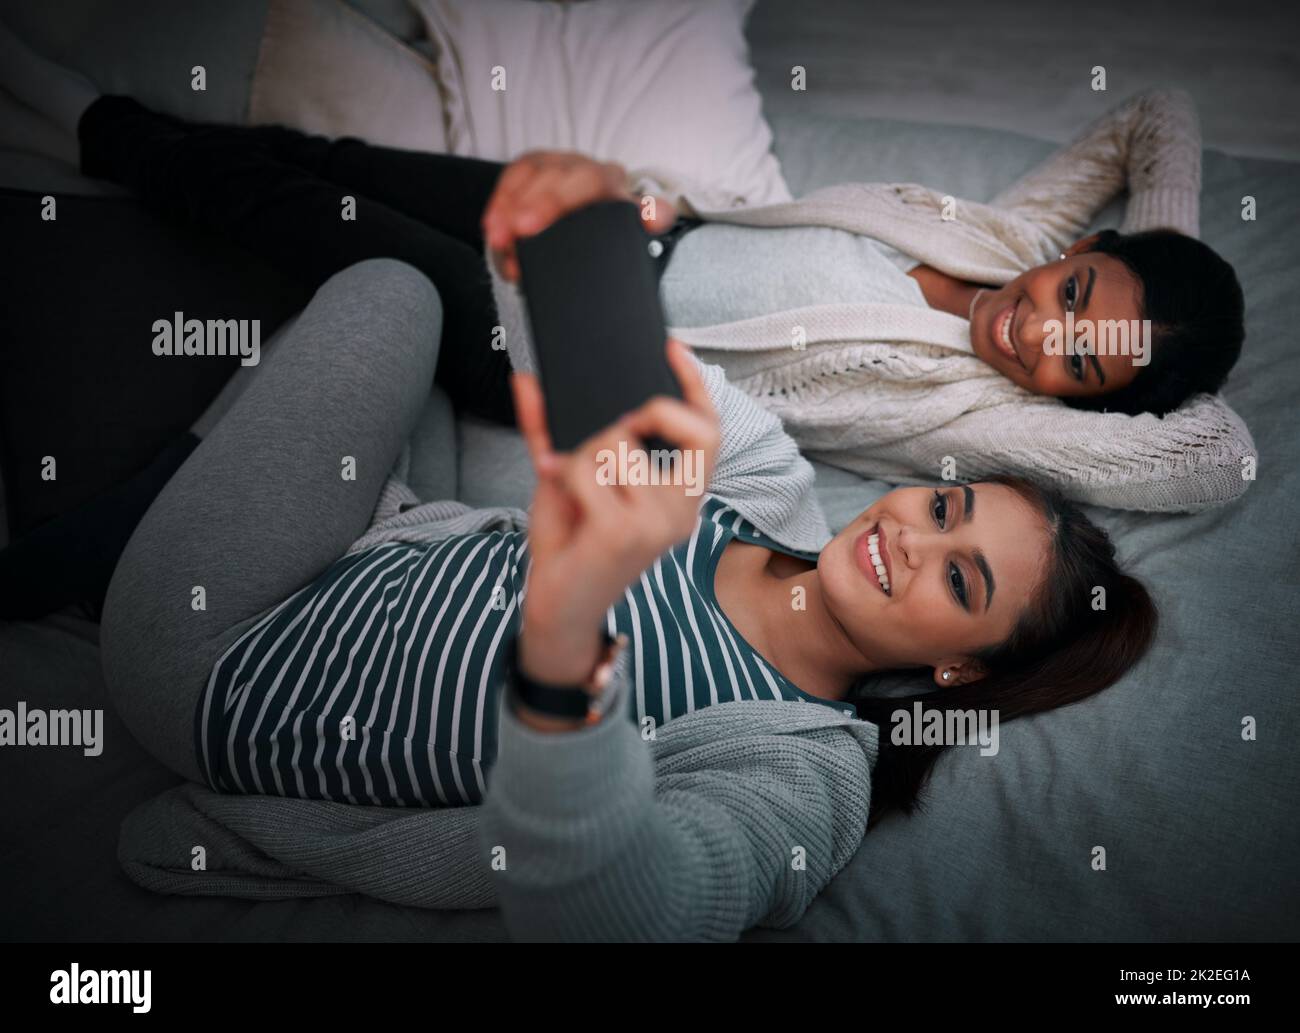 Were always selfie ready. Shot of two young women lying taking selfies while lying on a bed. Stock Photo